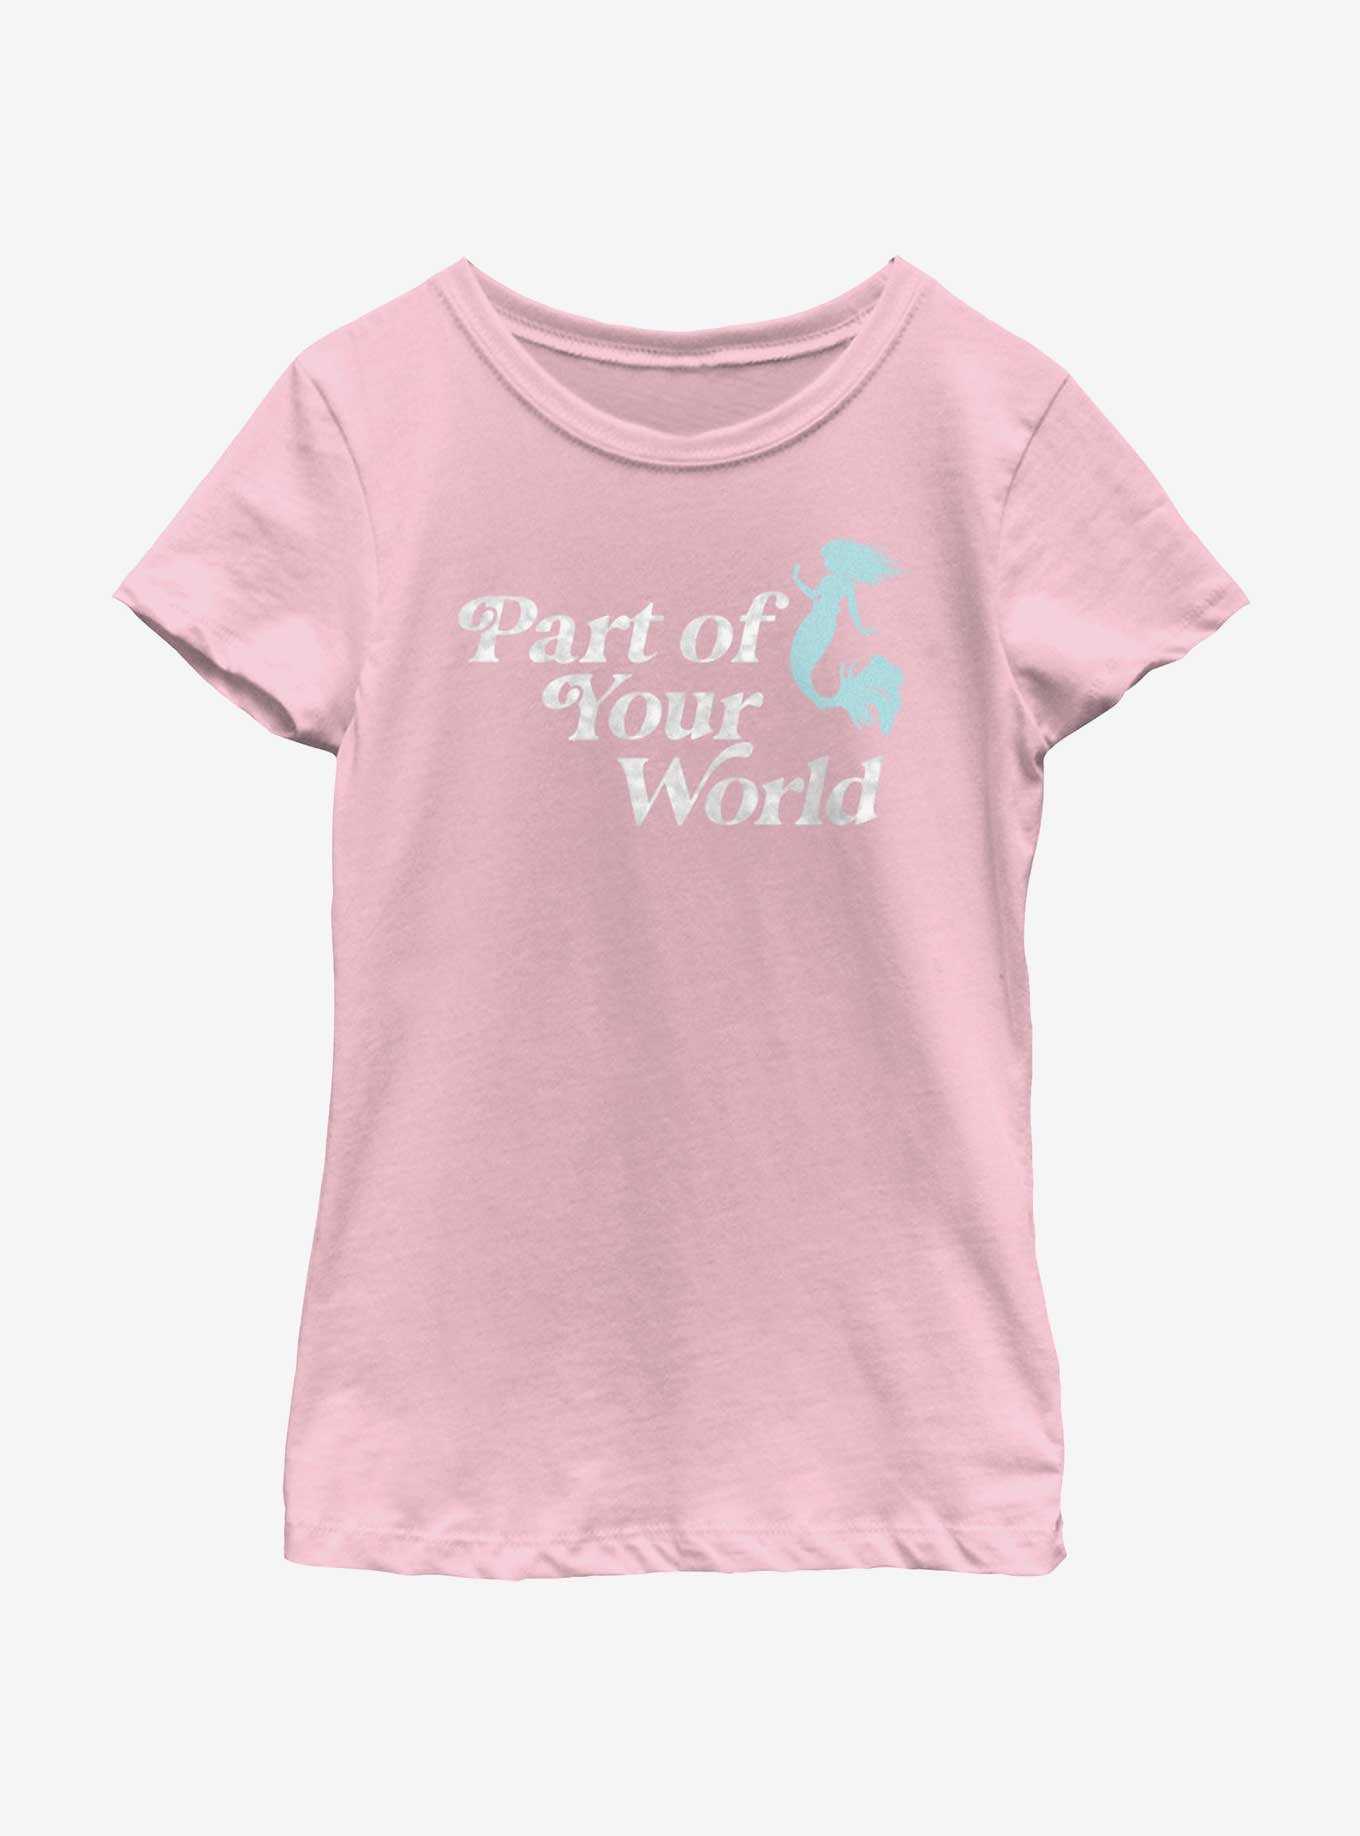 Disney The Little Mermaid Live Action Part of Your World Youth Girls T-Shirt, , hi-res